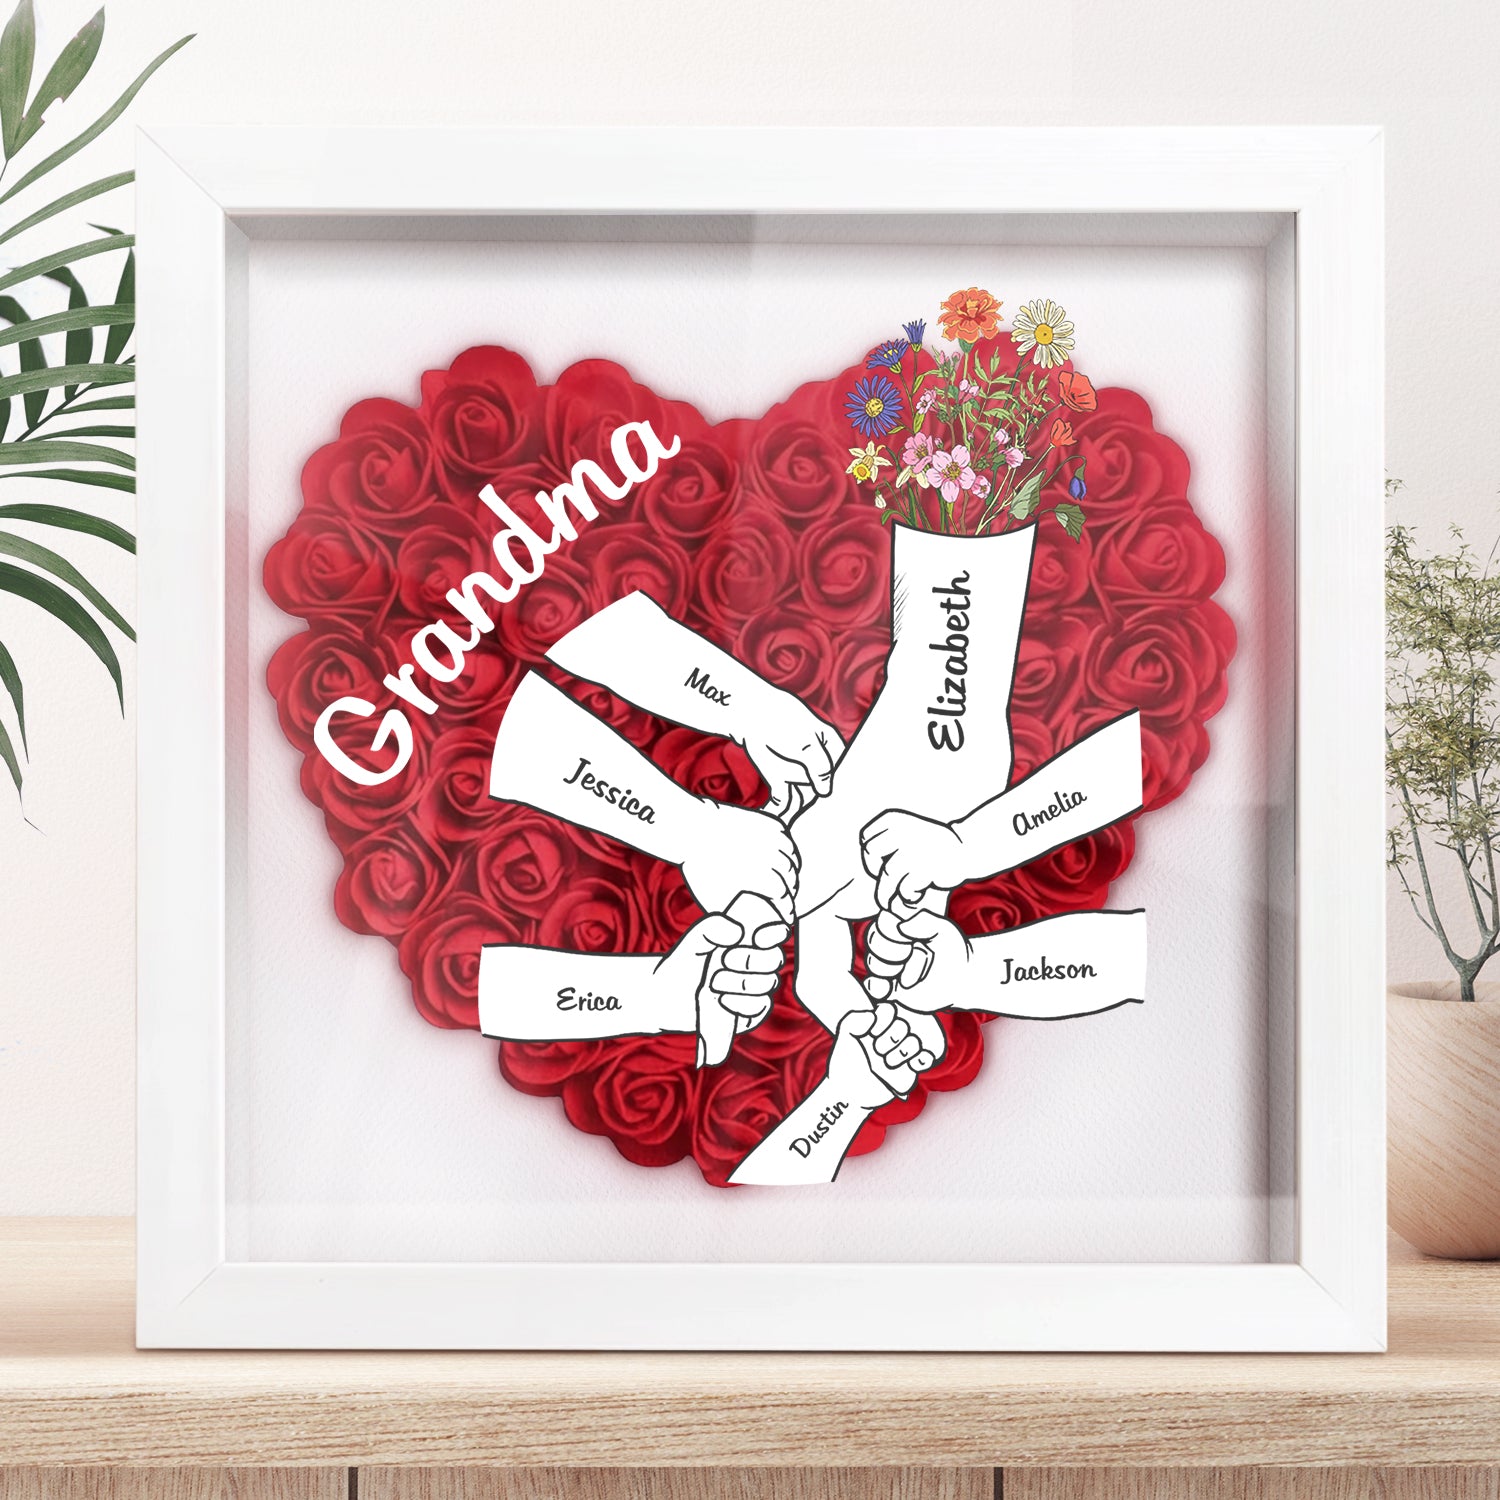 Mom Grandma Kids Hand In Hand - Gift For Mother, Grandmother - Personalized Flower Shadow Box